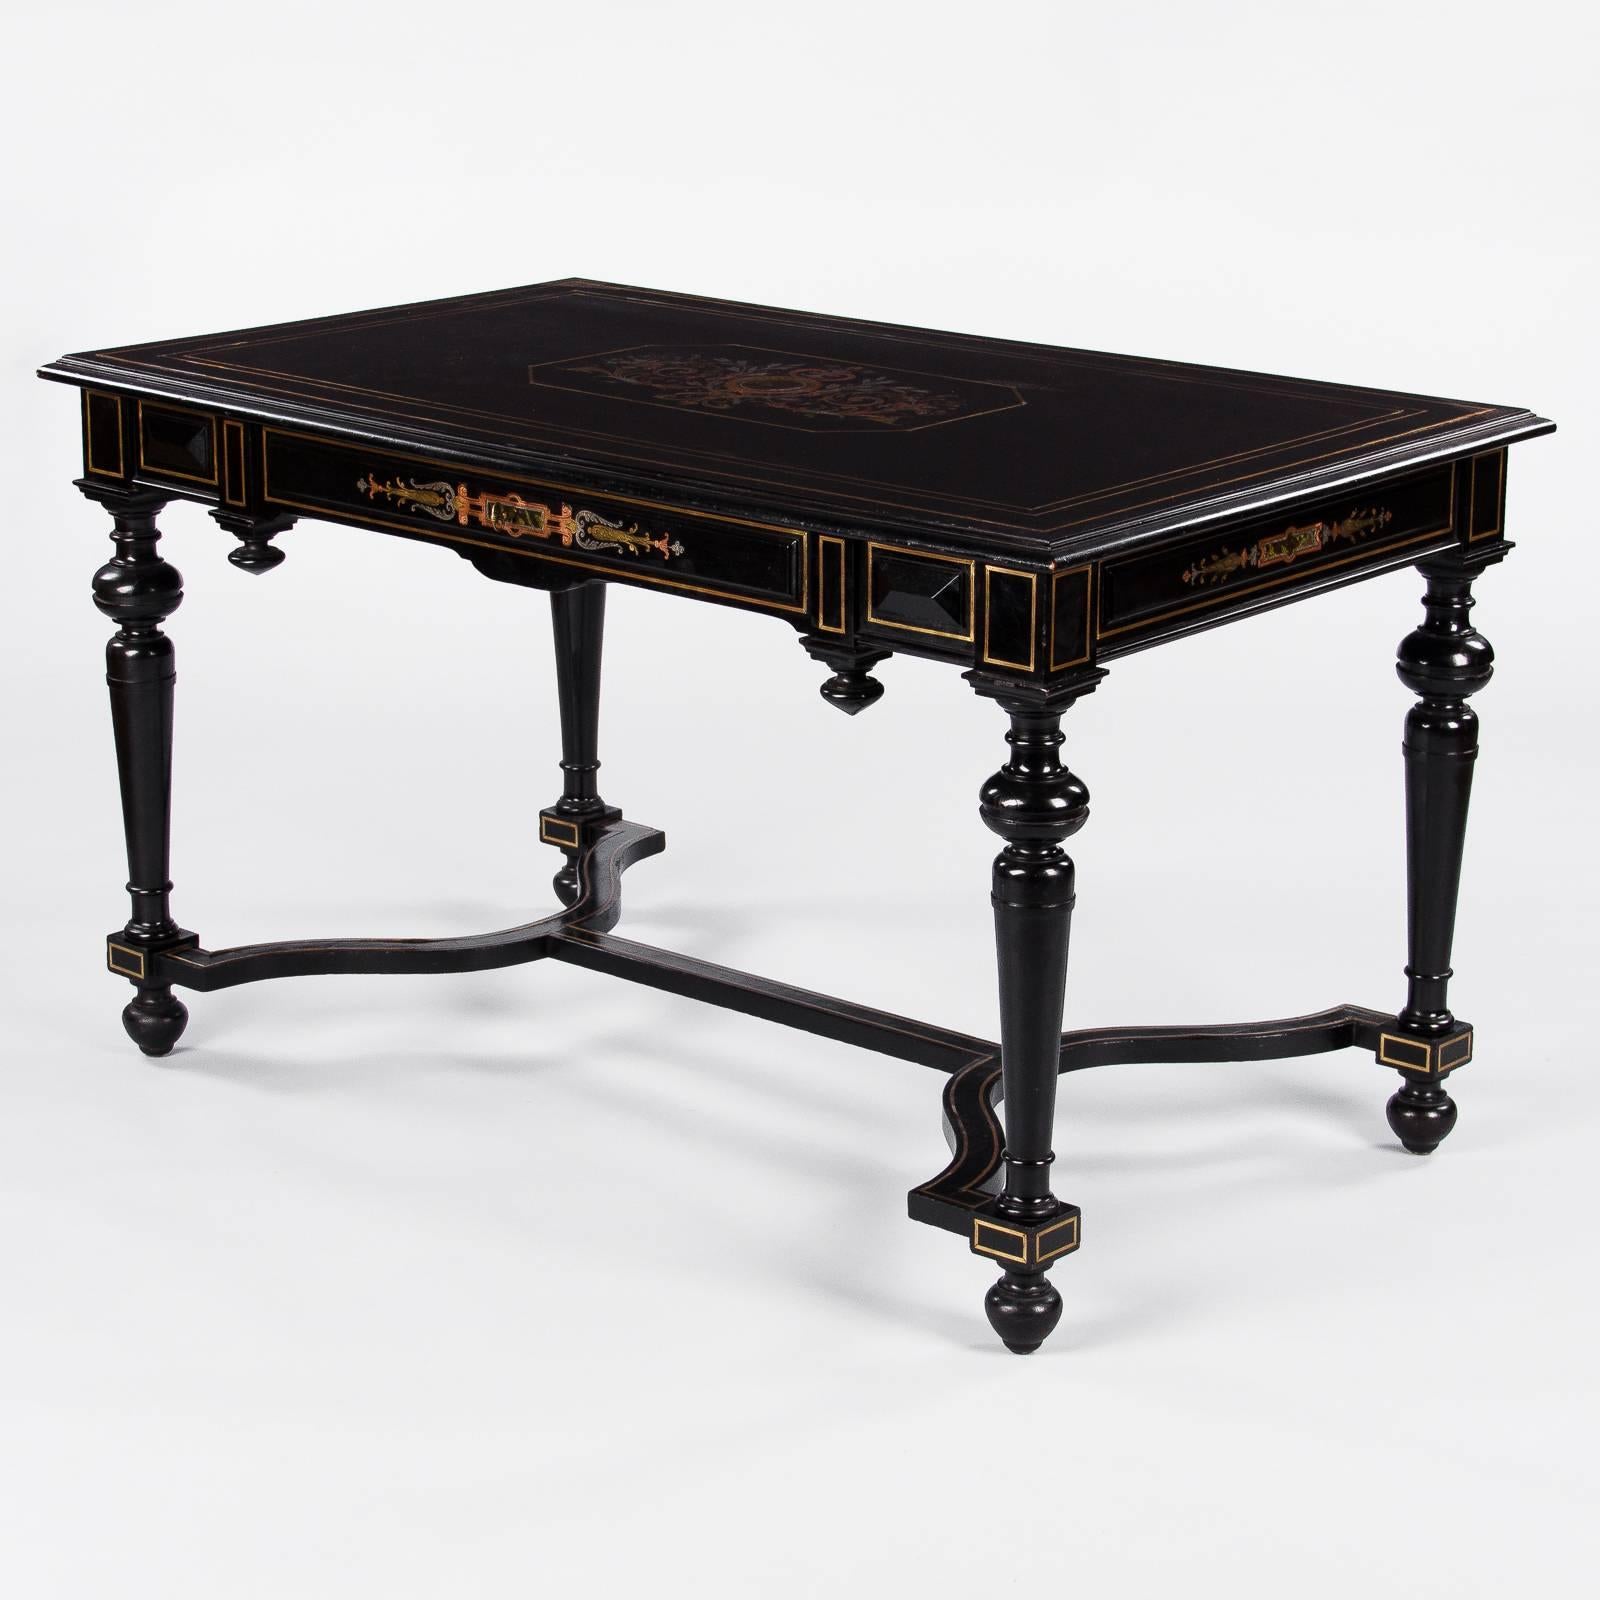 A stunning Napoleon III desk made of ebonized pear wood with brass inlay. Intricate arabesque inlay designs around the apron on the drawer and on top mixing brass, pewter and copper. More fine details with toupie finials under the apron, baluster